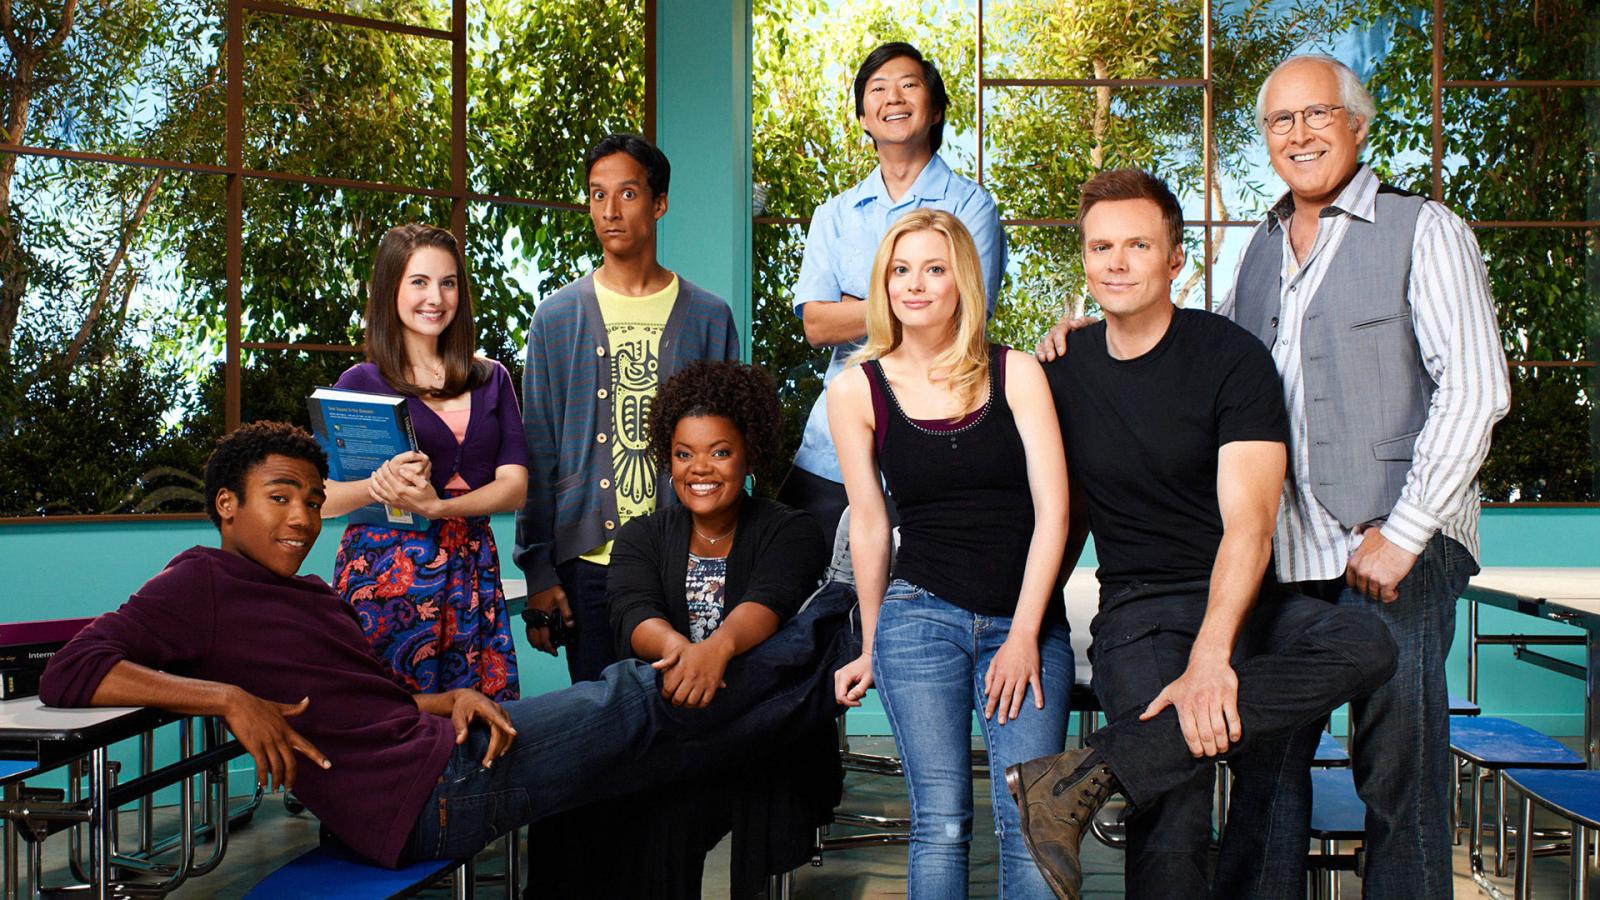 7 Lesser-Known Sitcoms For Those Who Finally Got Sick of Friends & The Office - image 1